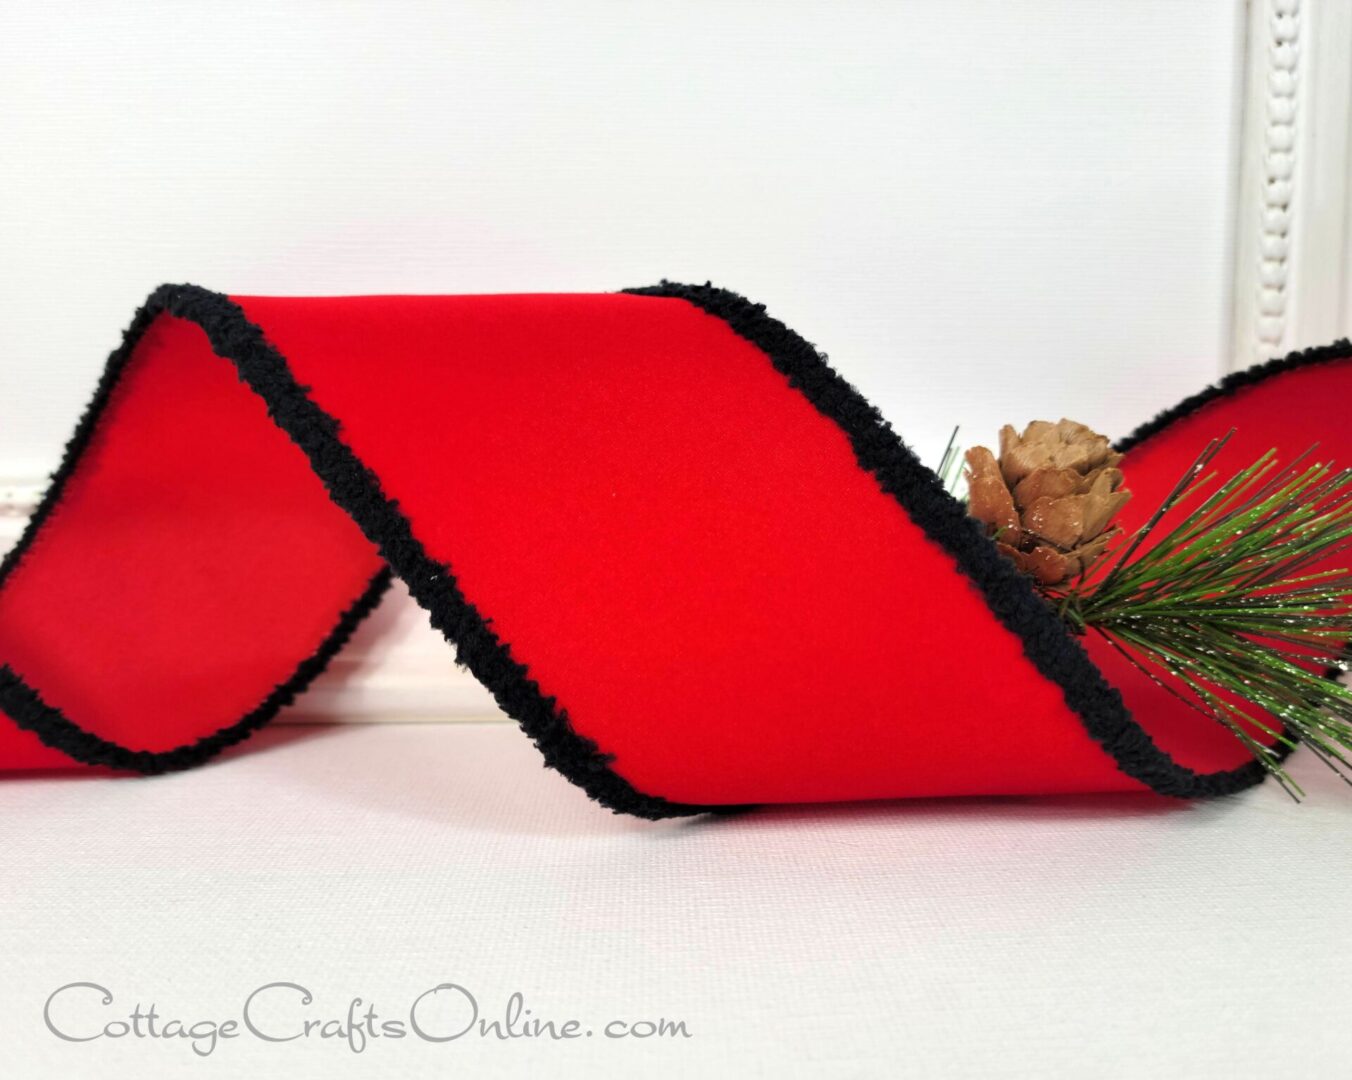 Red velvet with black chenille edge 2.5" wide wired ribbon from the Etsy shop of Cottage Crafts Online.